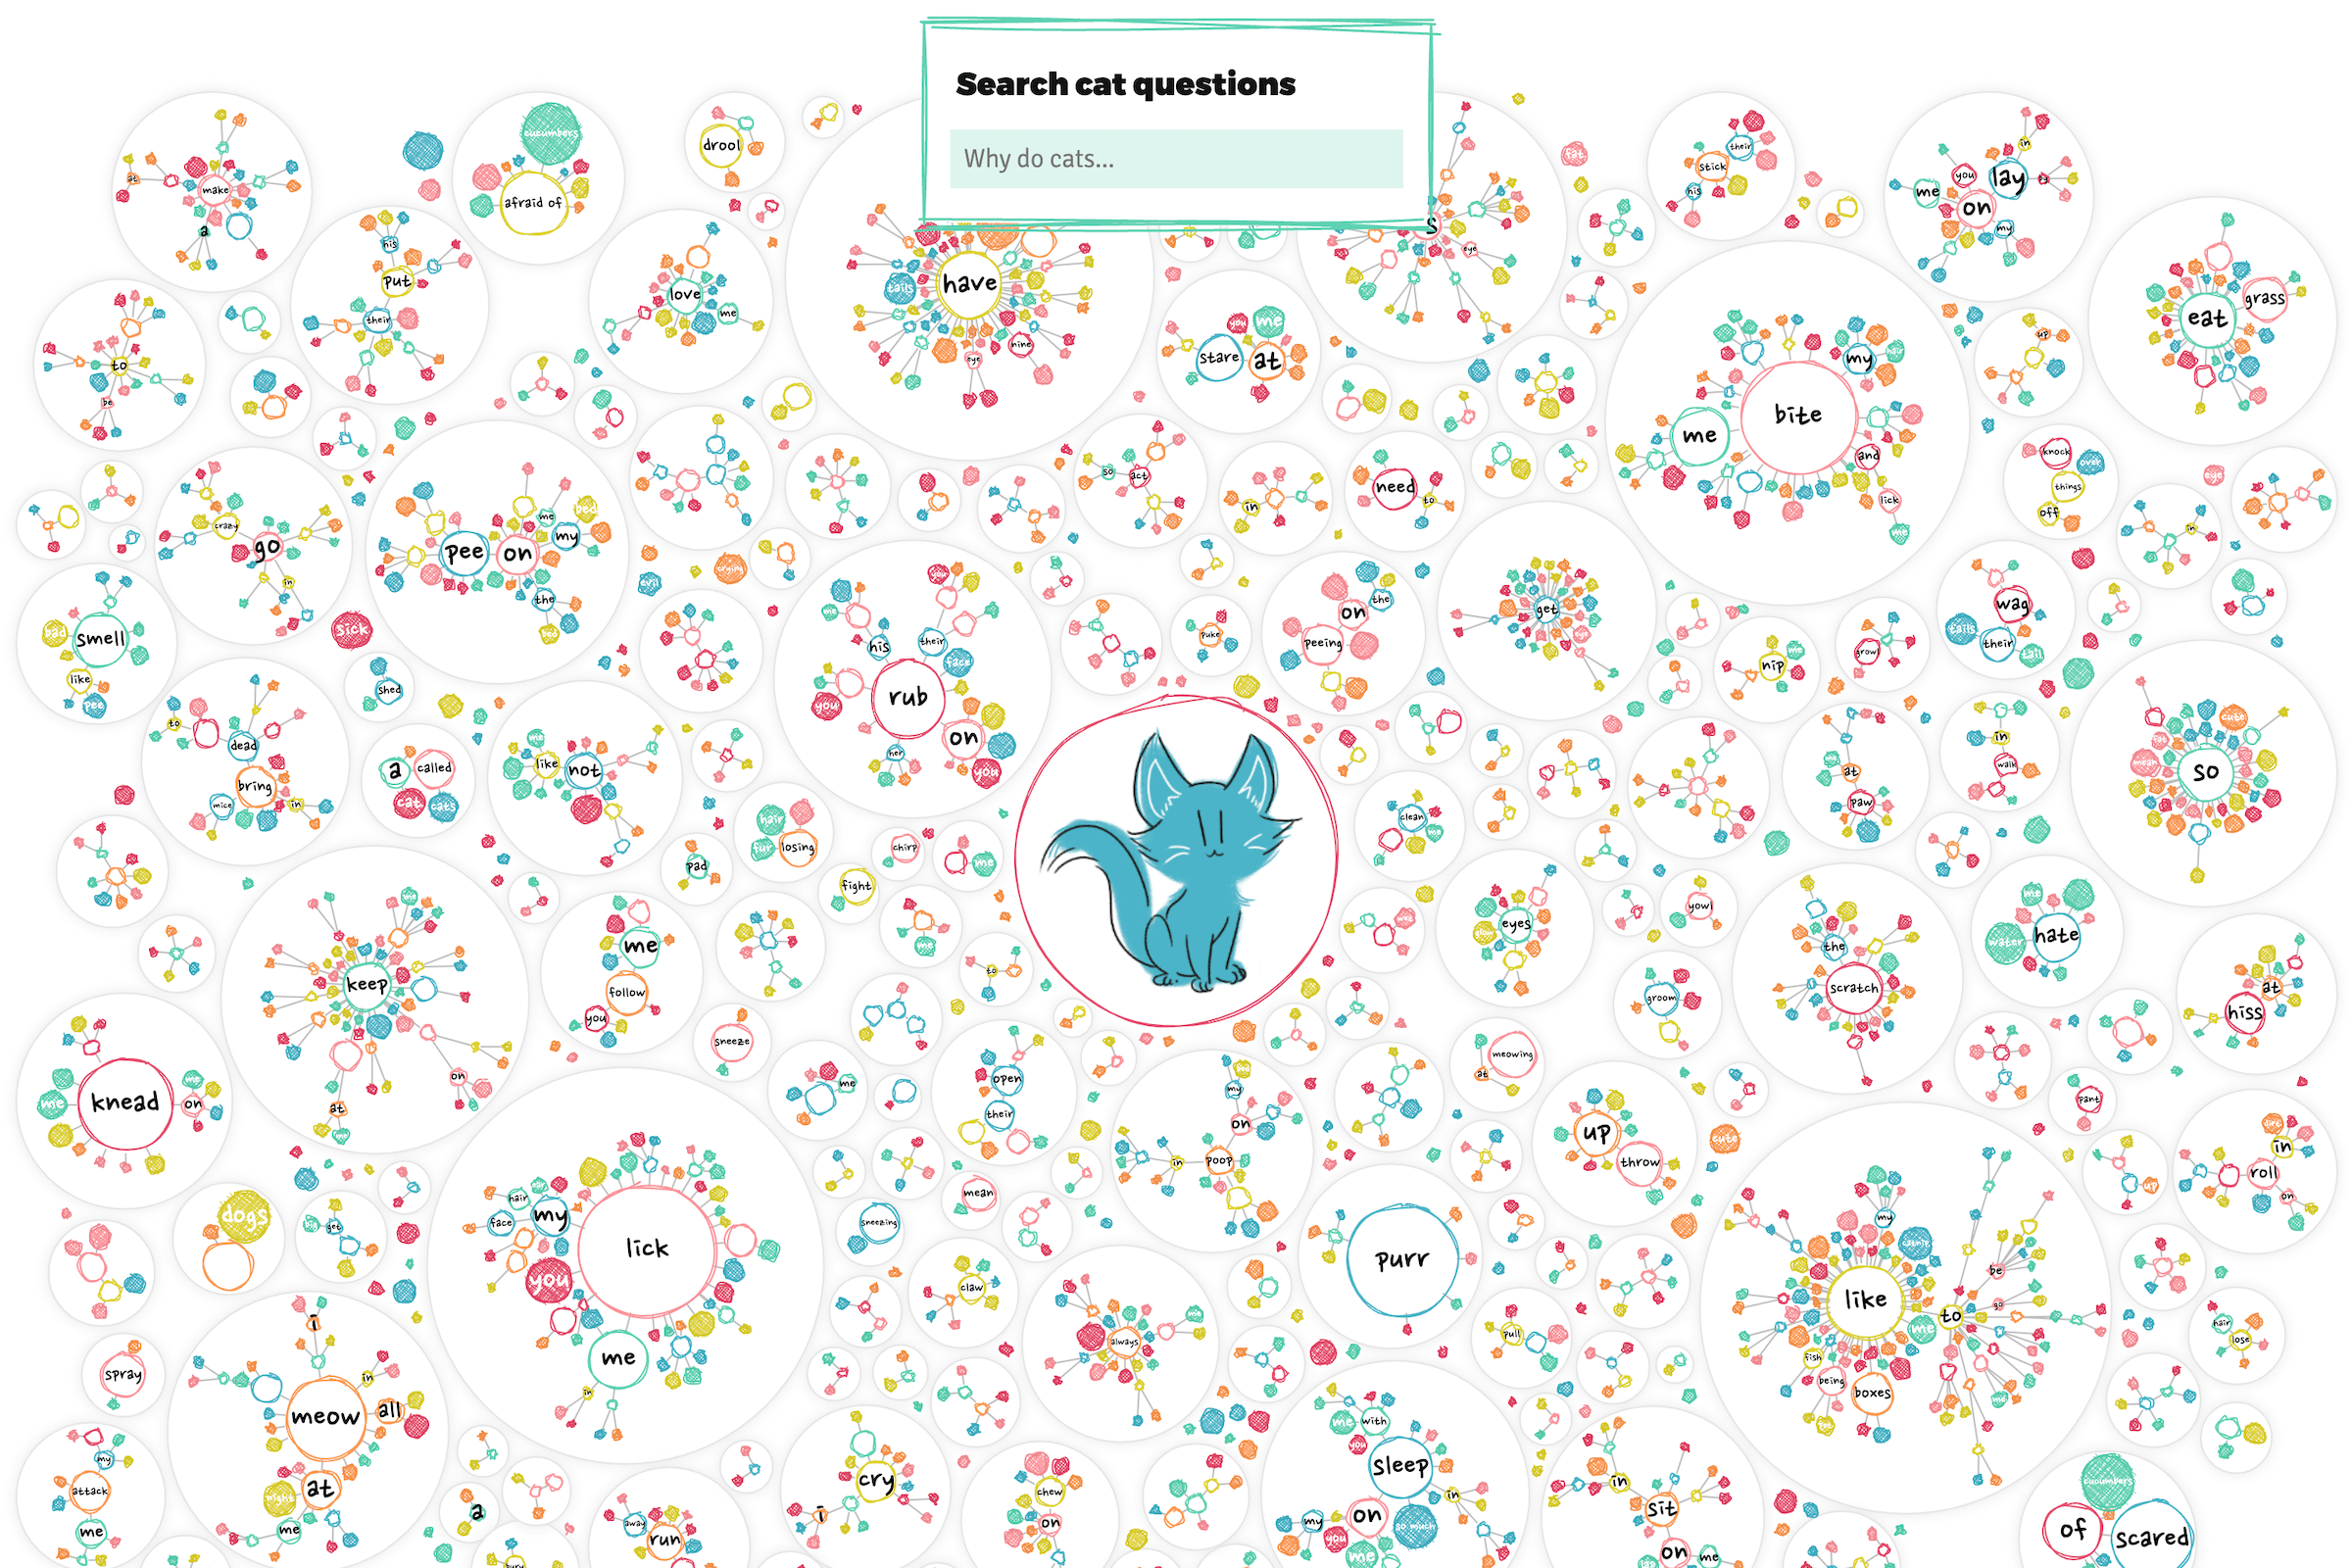 The interactive that lets you explore all of the ±2200 cat questions